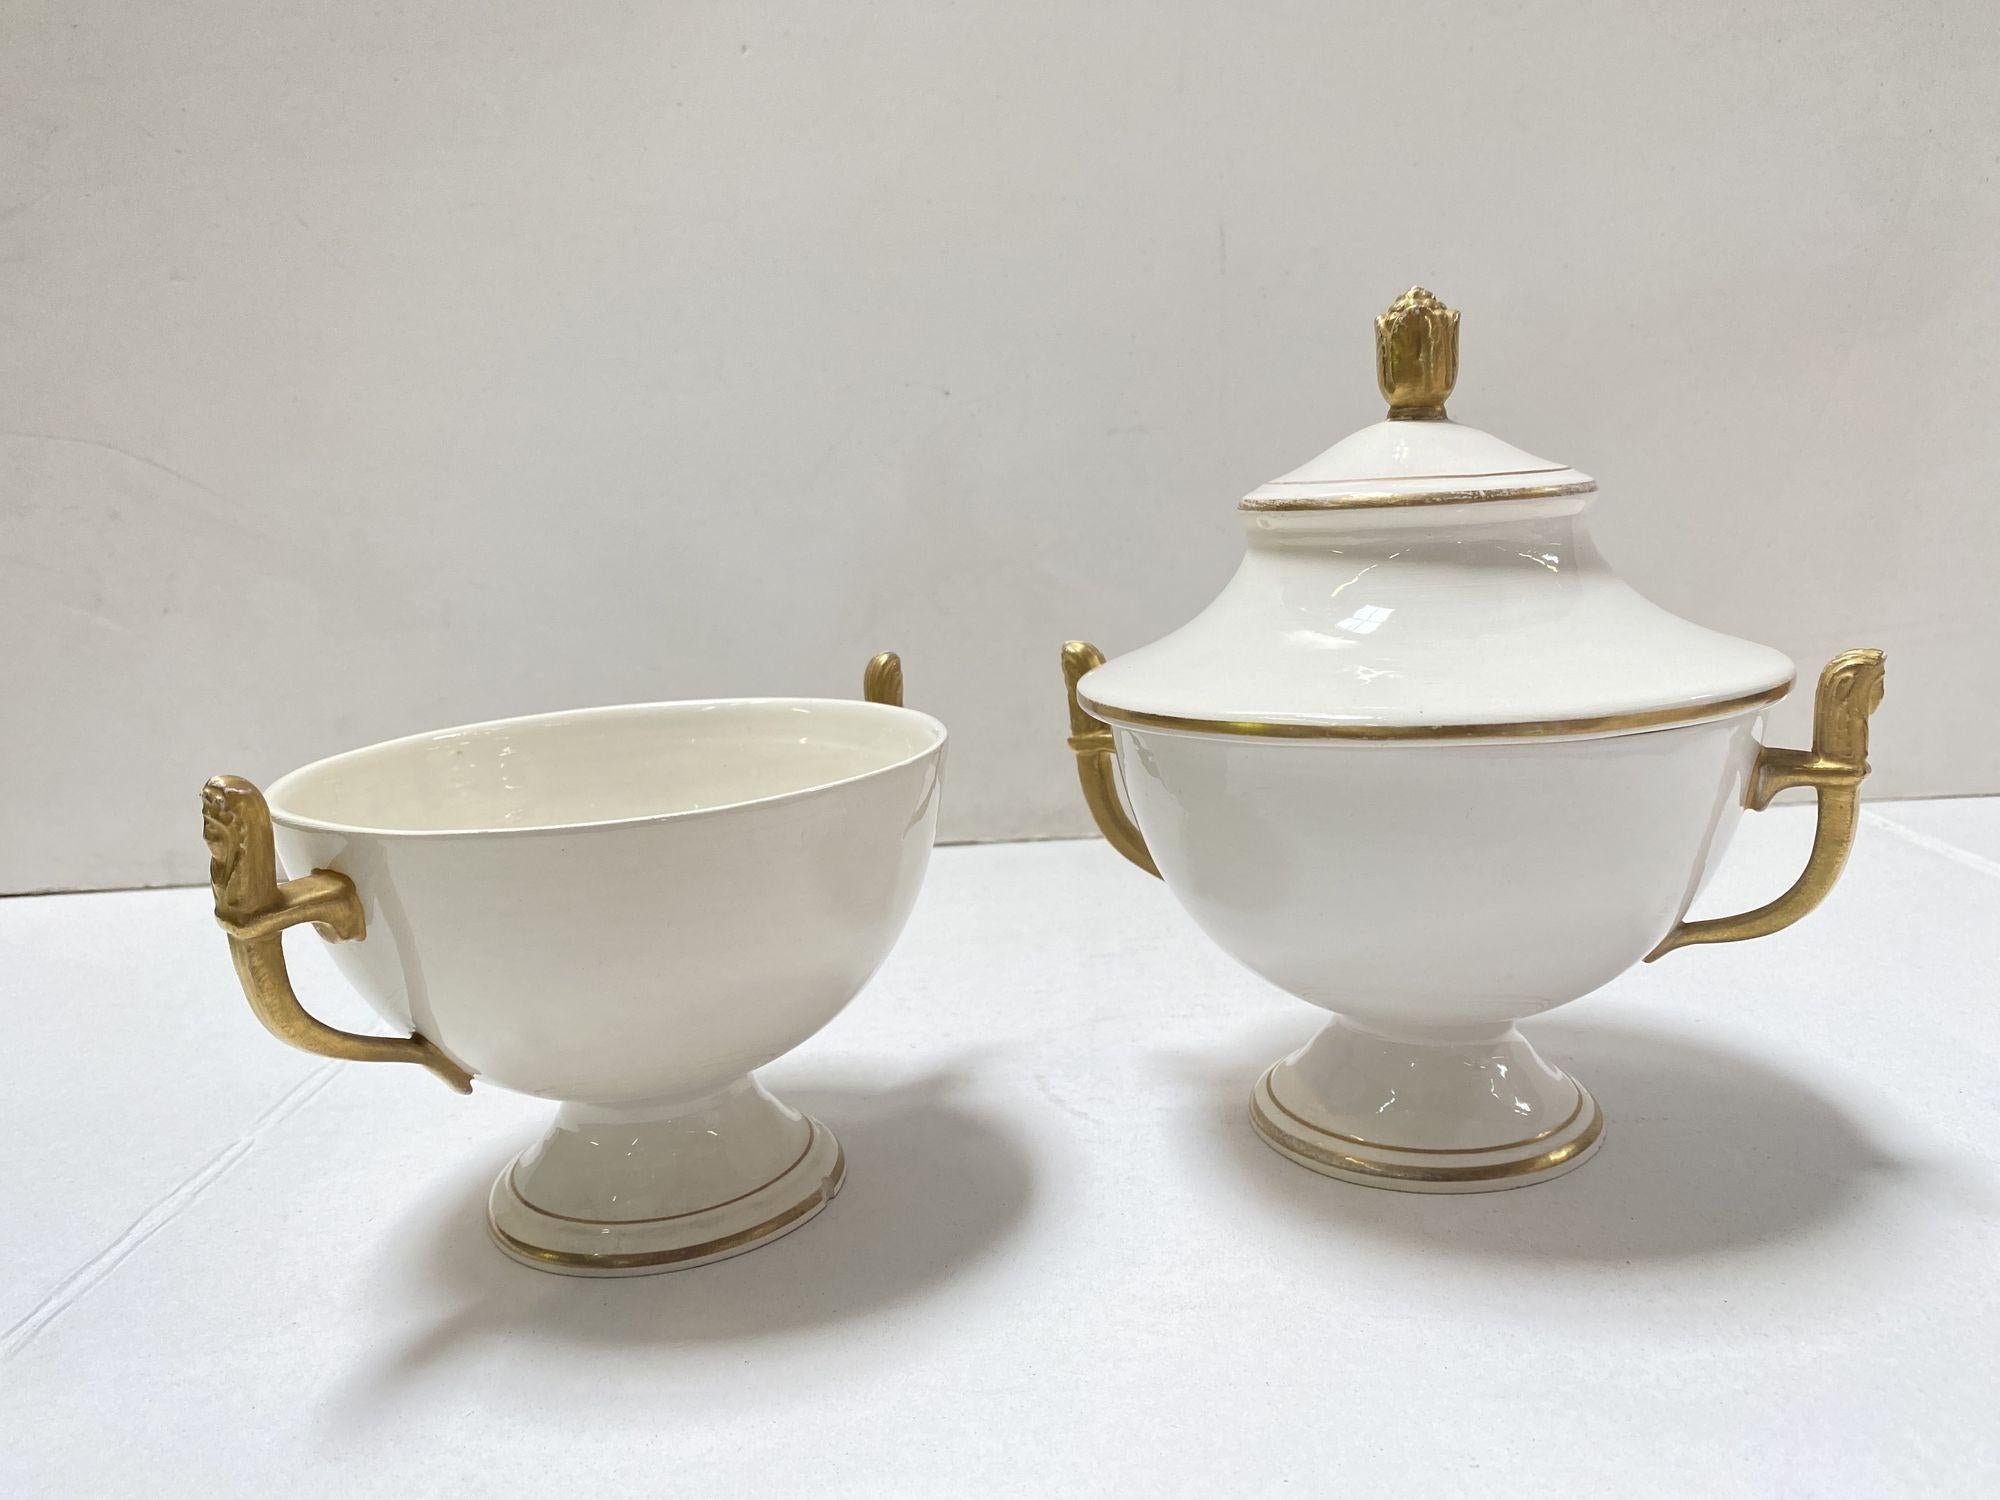 1910's Italian Ivory and Gold Sugar Holders/ Bowls with Lid For Sale 2